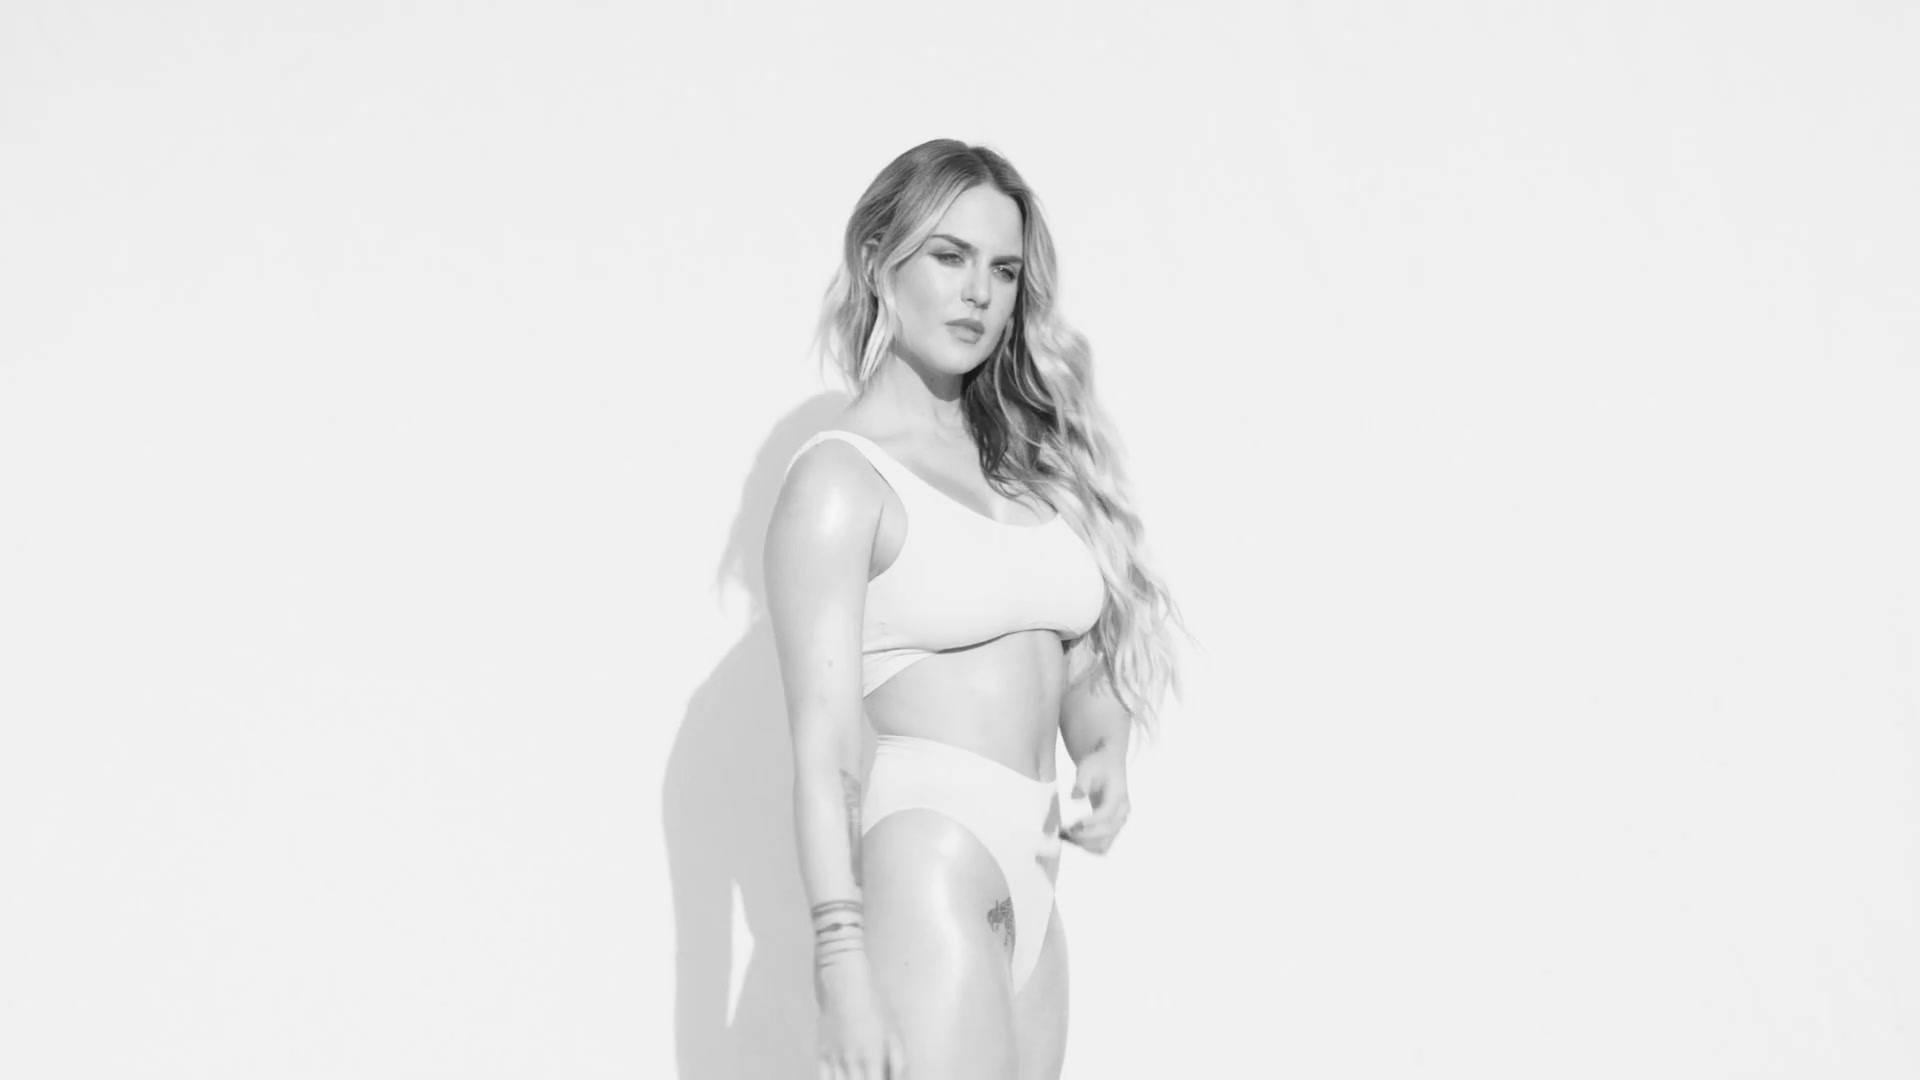 JoJo show off her sexy body wearing panties and bra in Lonely Hearts music ...